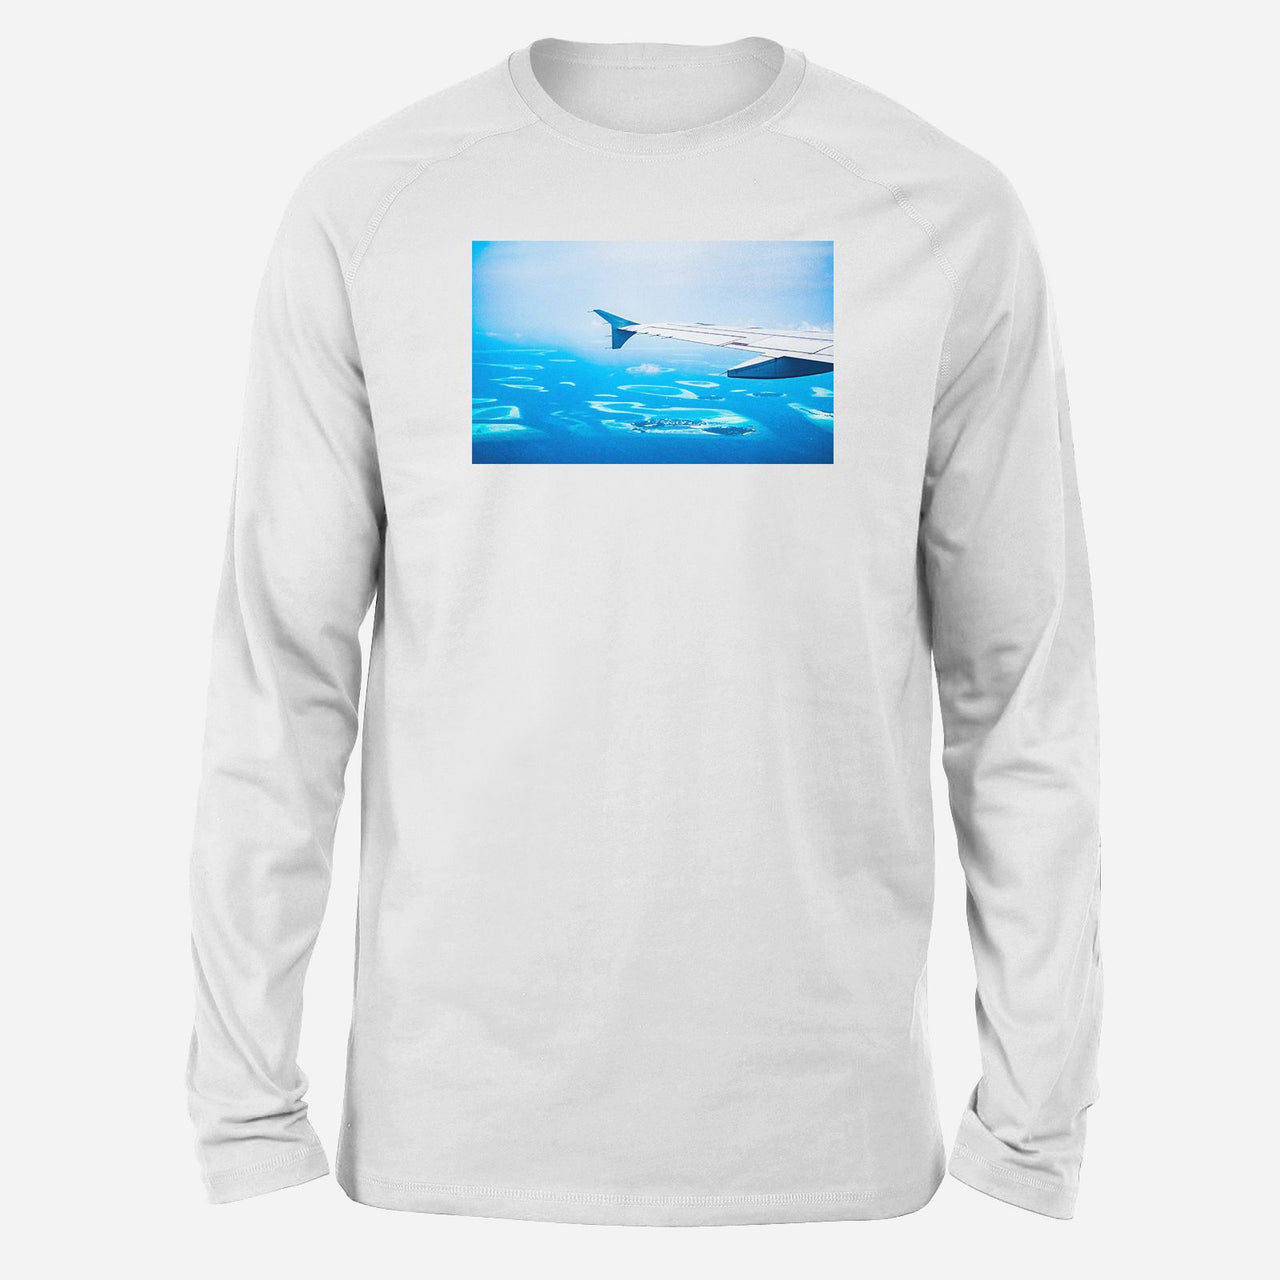 Outstanding View Through Airplane Wing Designed Long-Sleeve T-Shirts